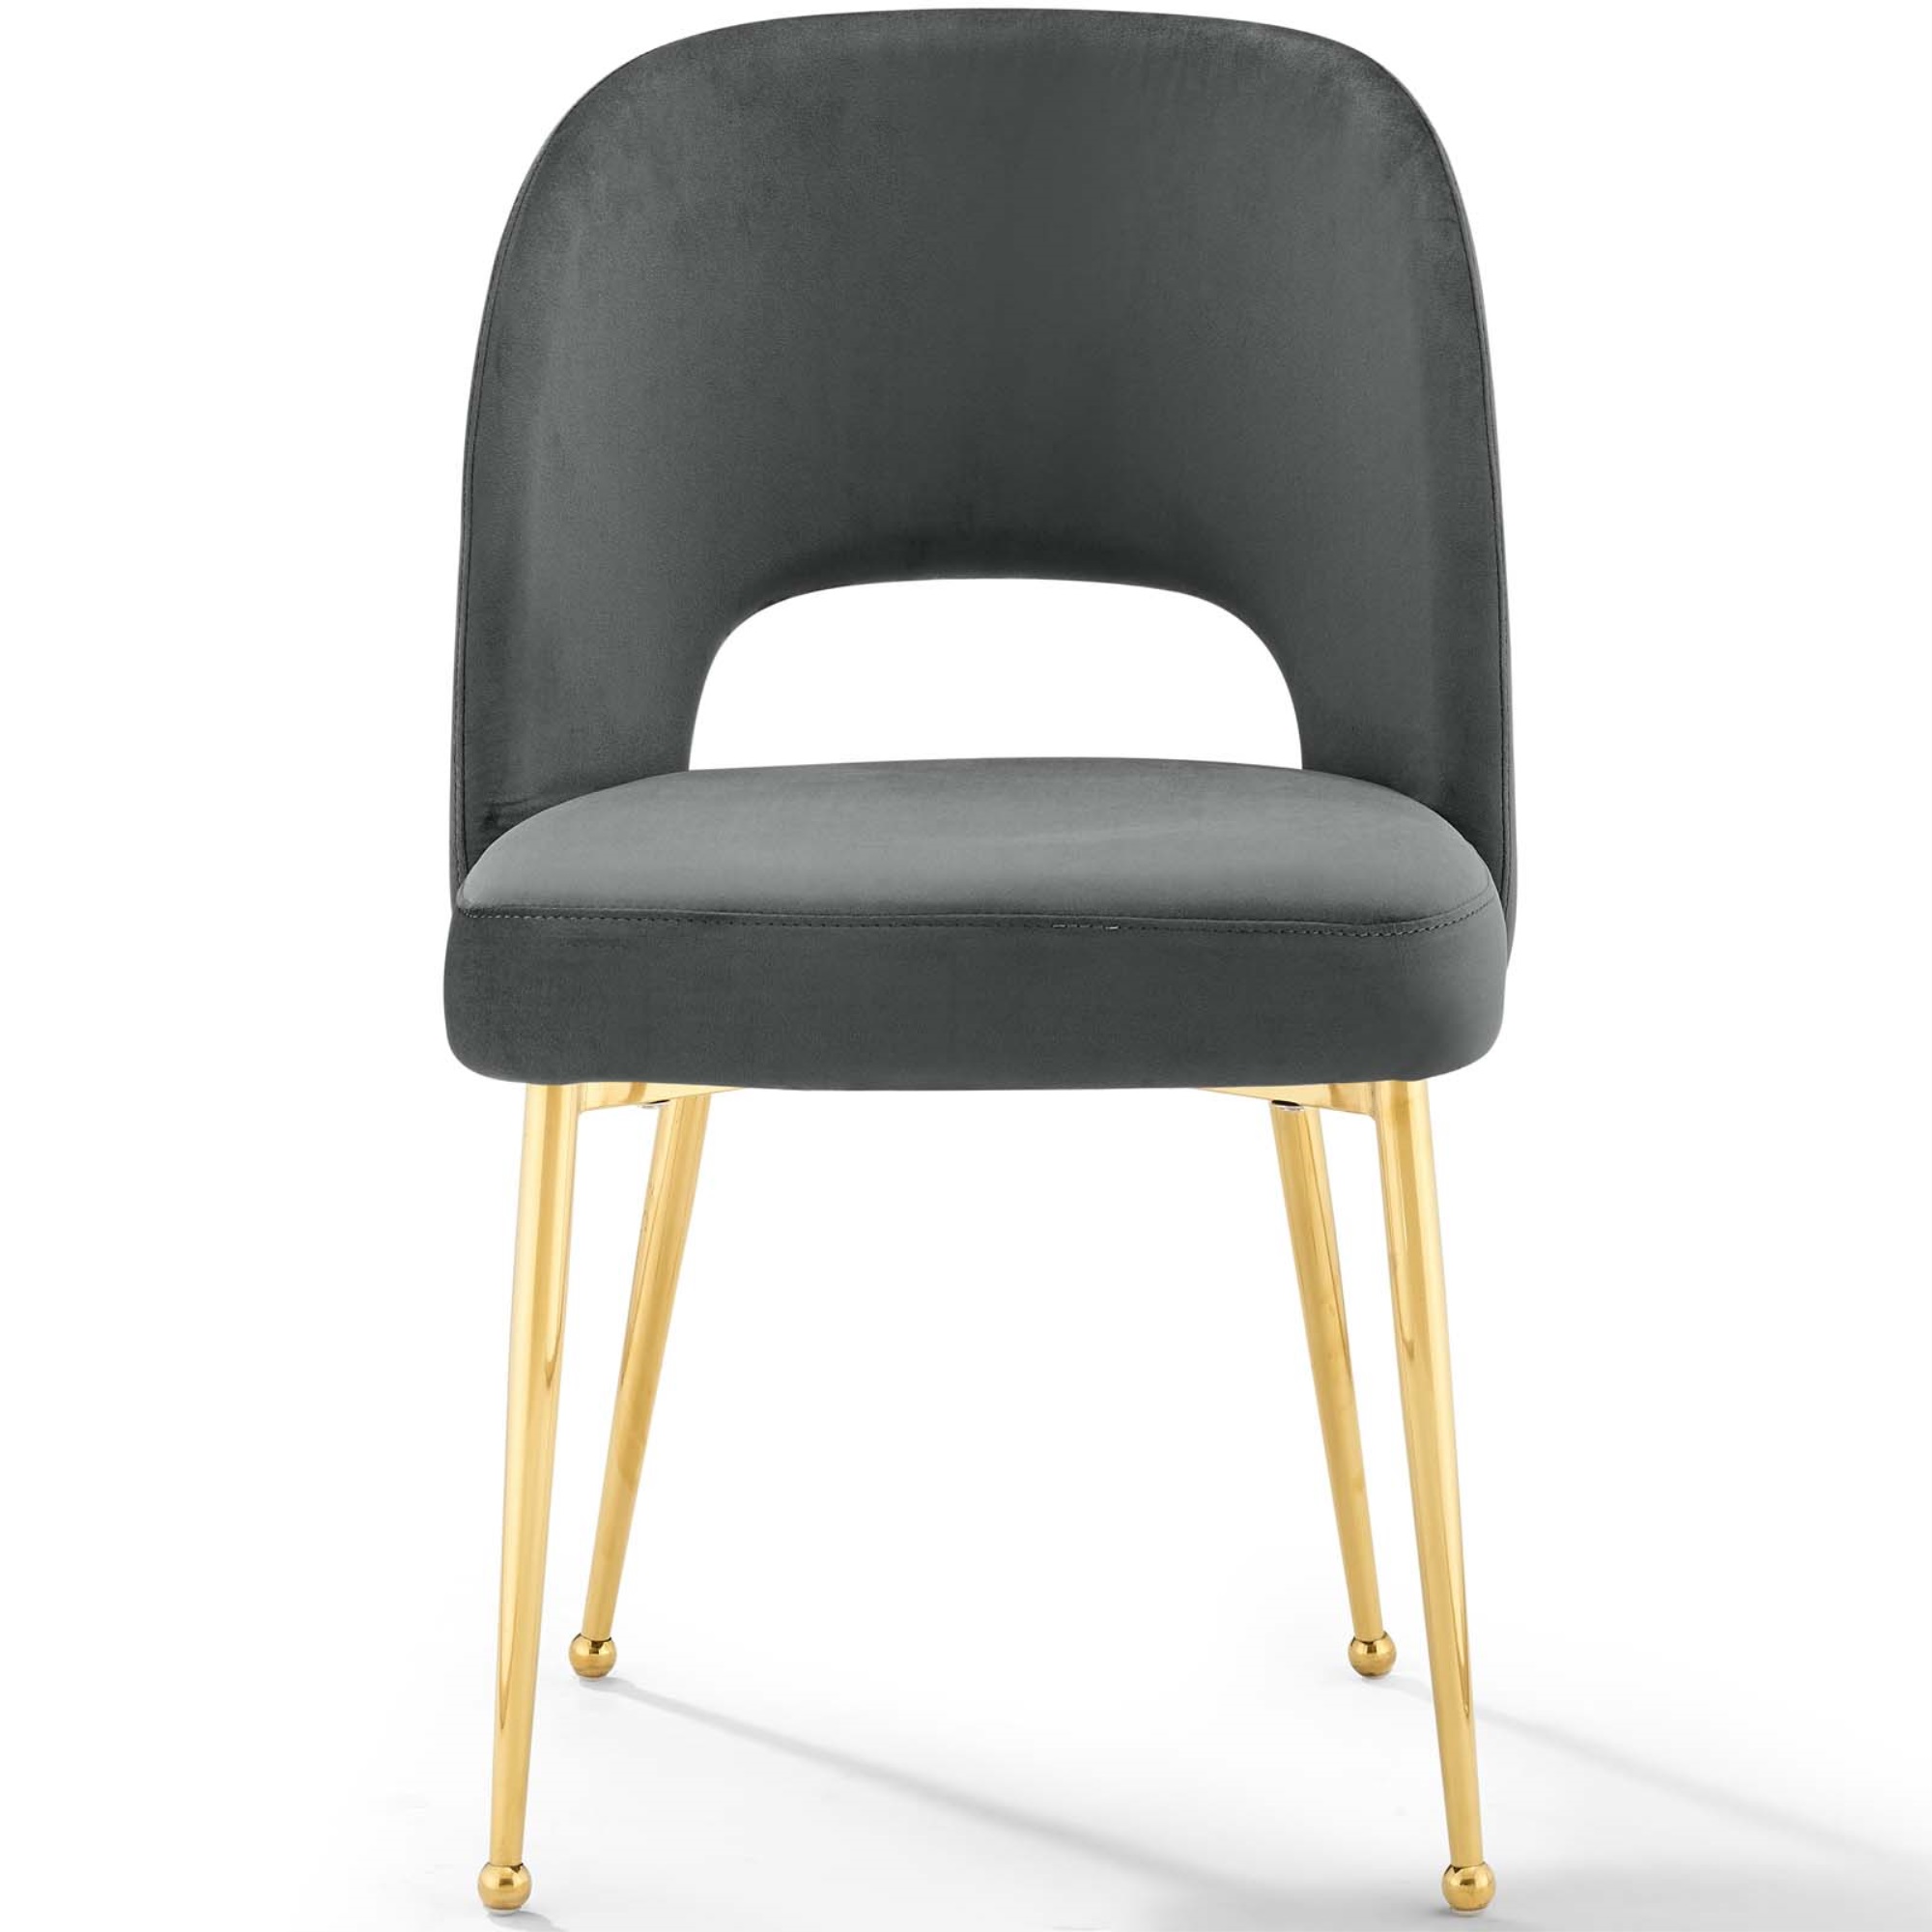 Ergode Rouse Dining Room Side Chair - Charcoal